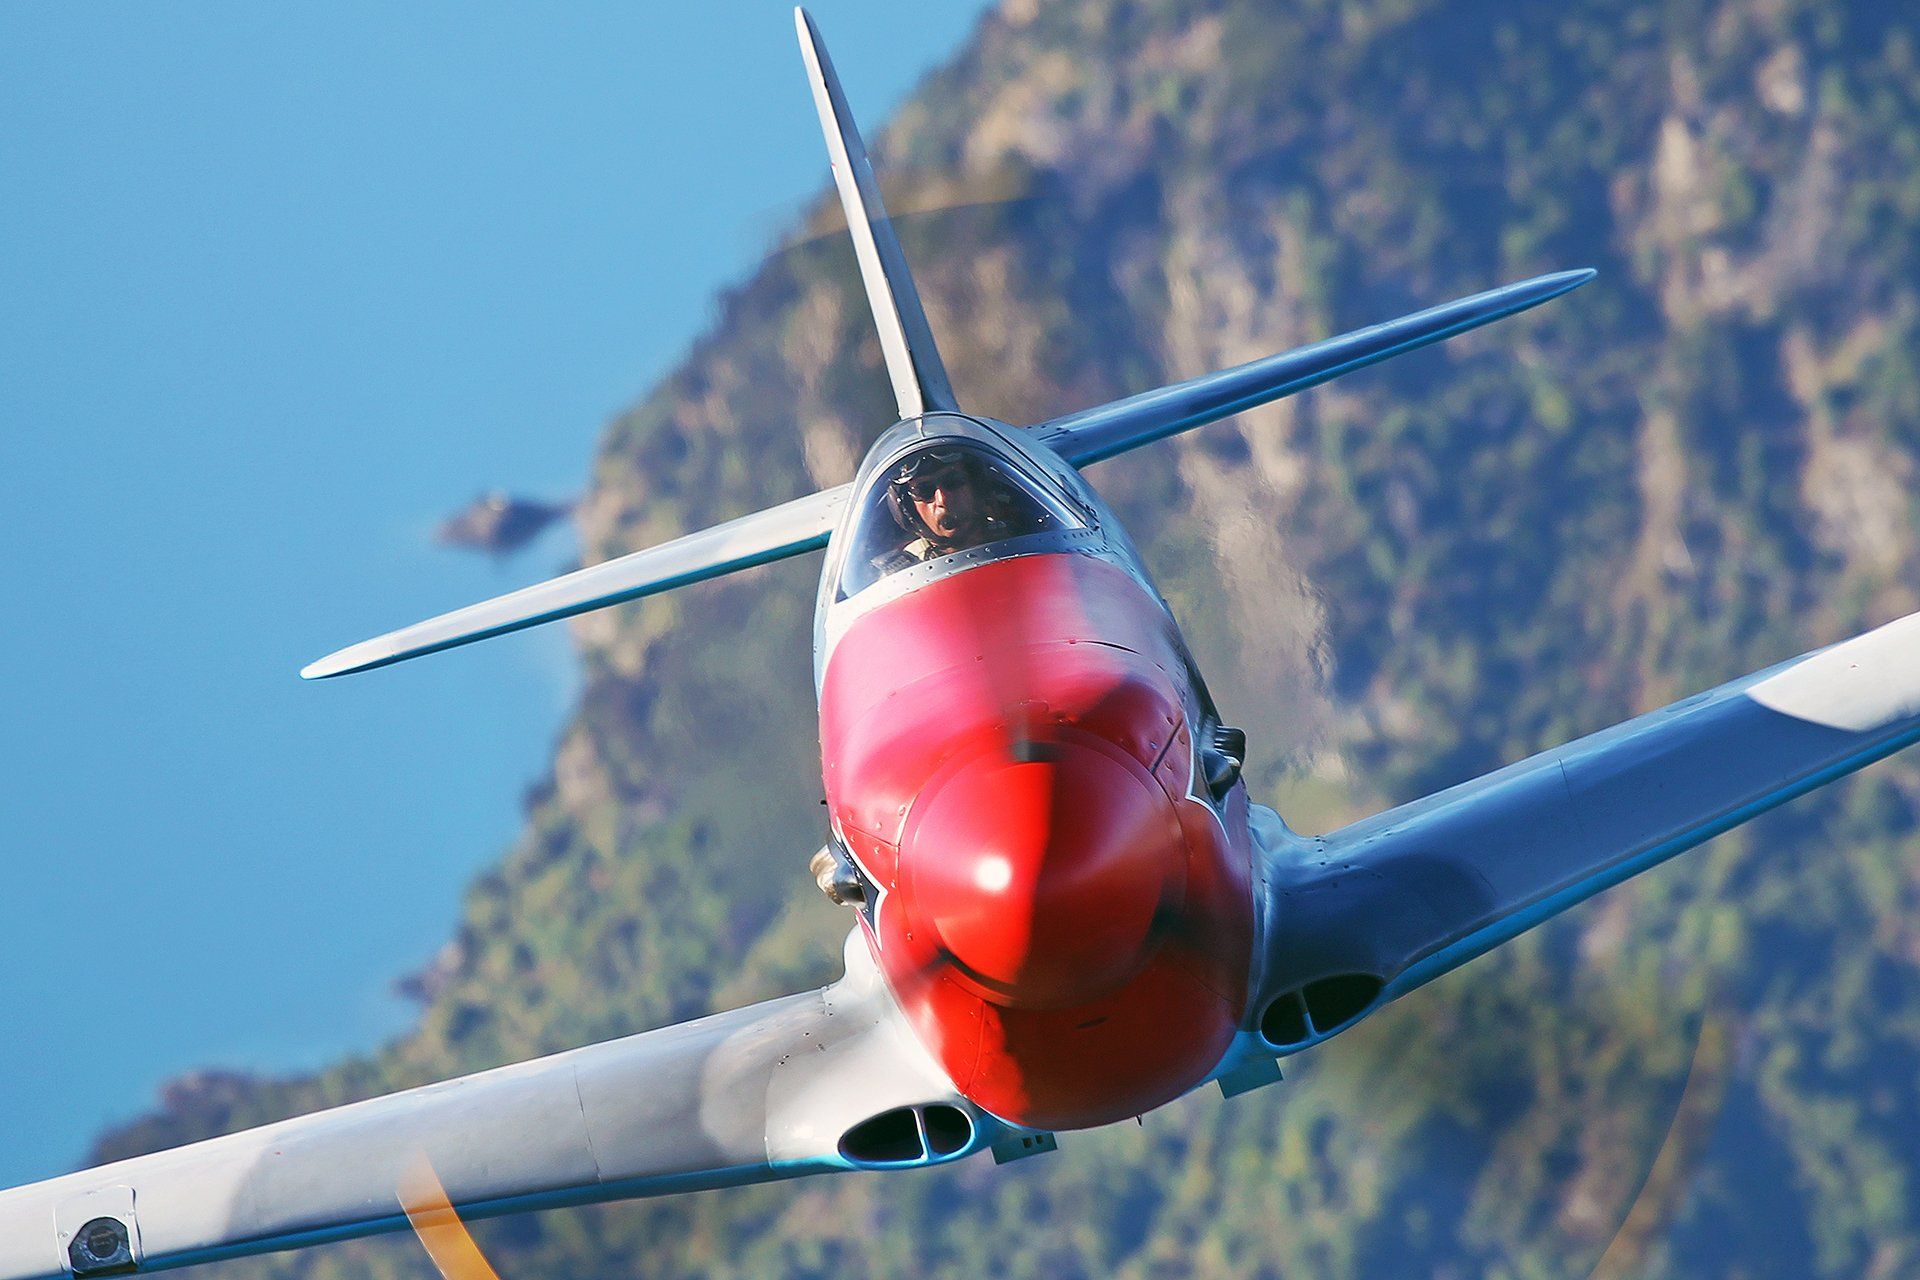 Full Noise Yak 3 fighter plane from Fighter Flights in Marlborough, New Zealand